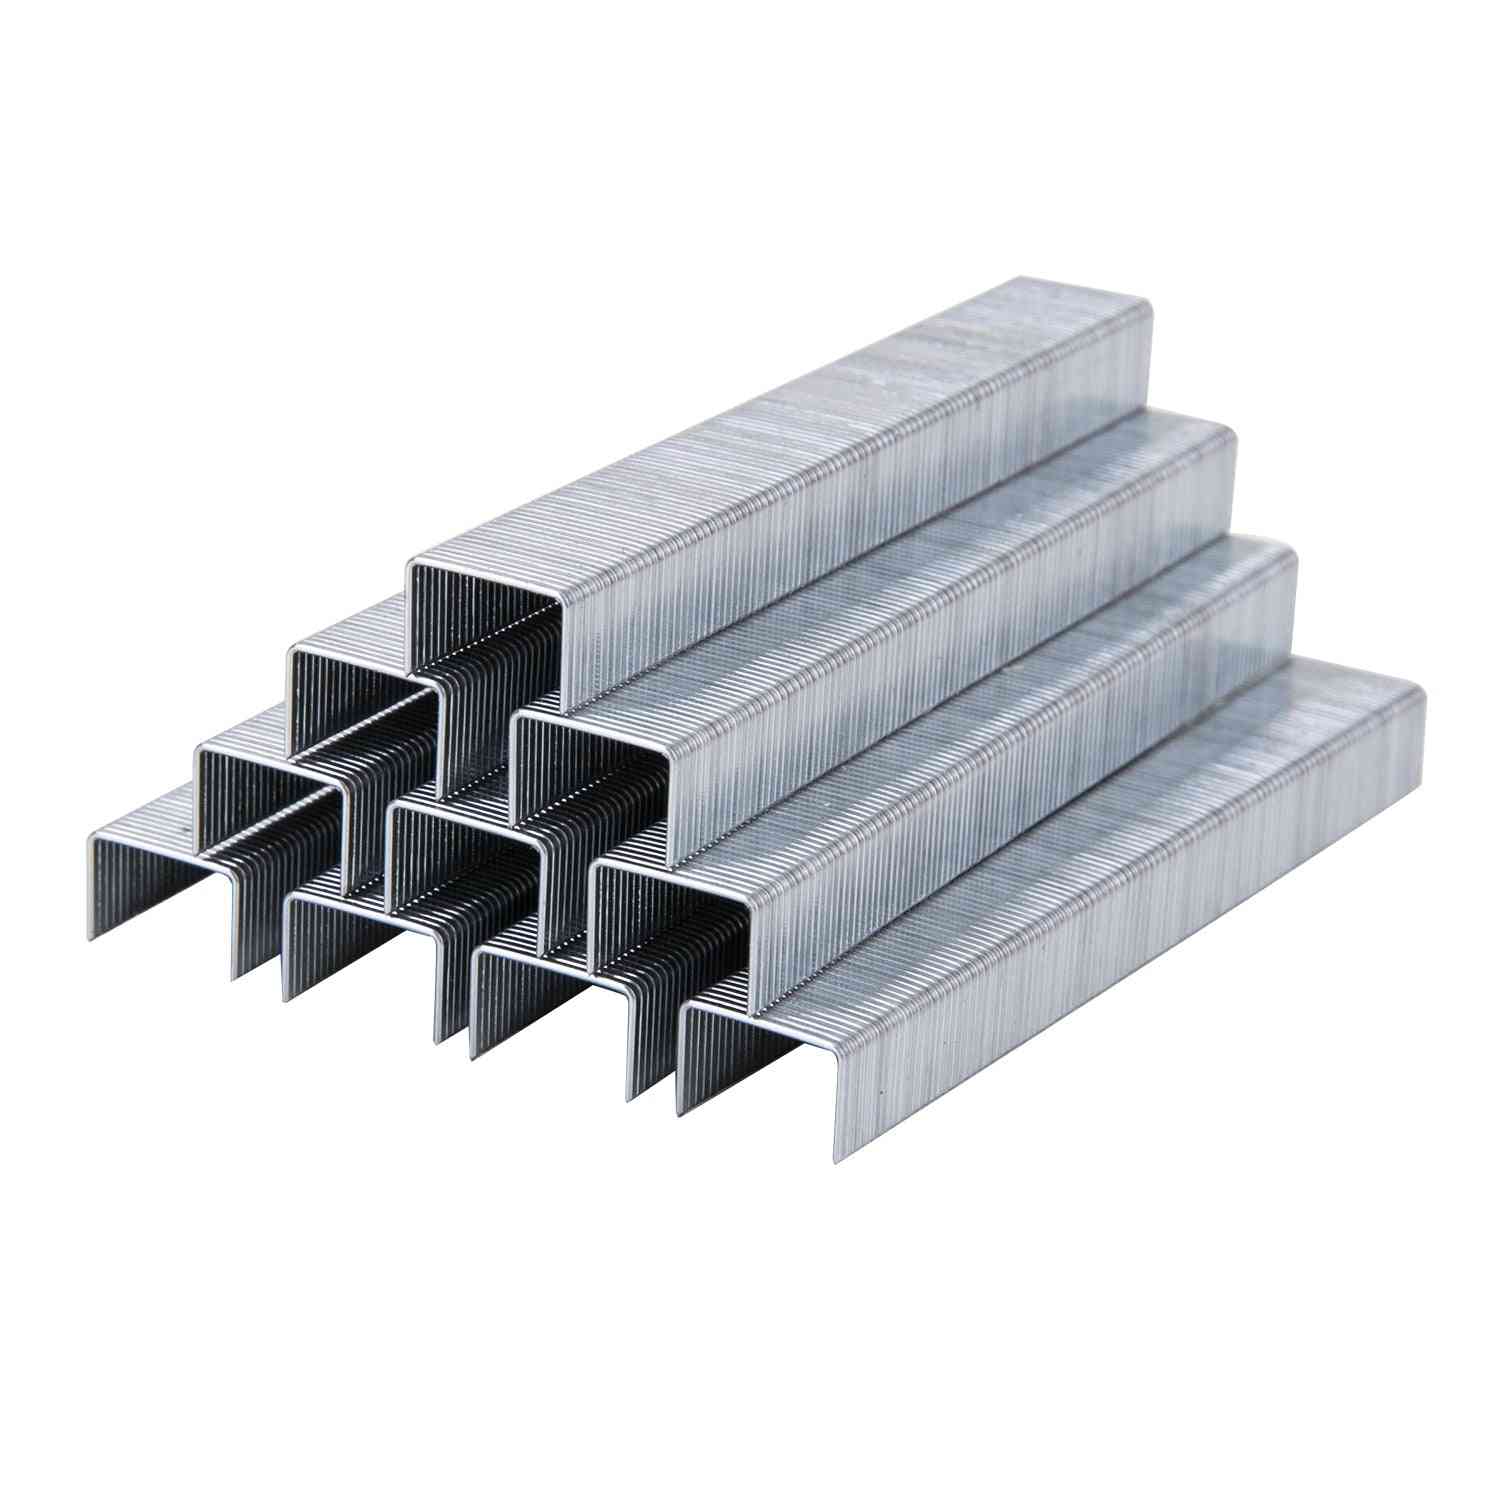 Zinc Plated Wire, Iron Nail Staple For Speciality Stapler